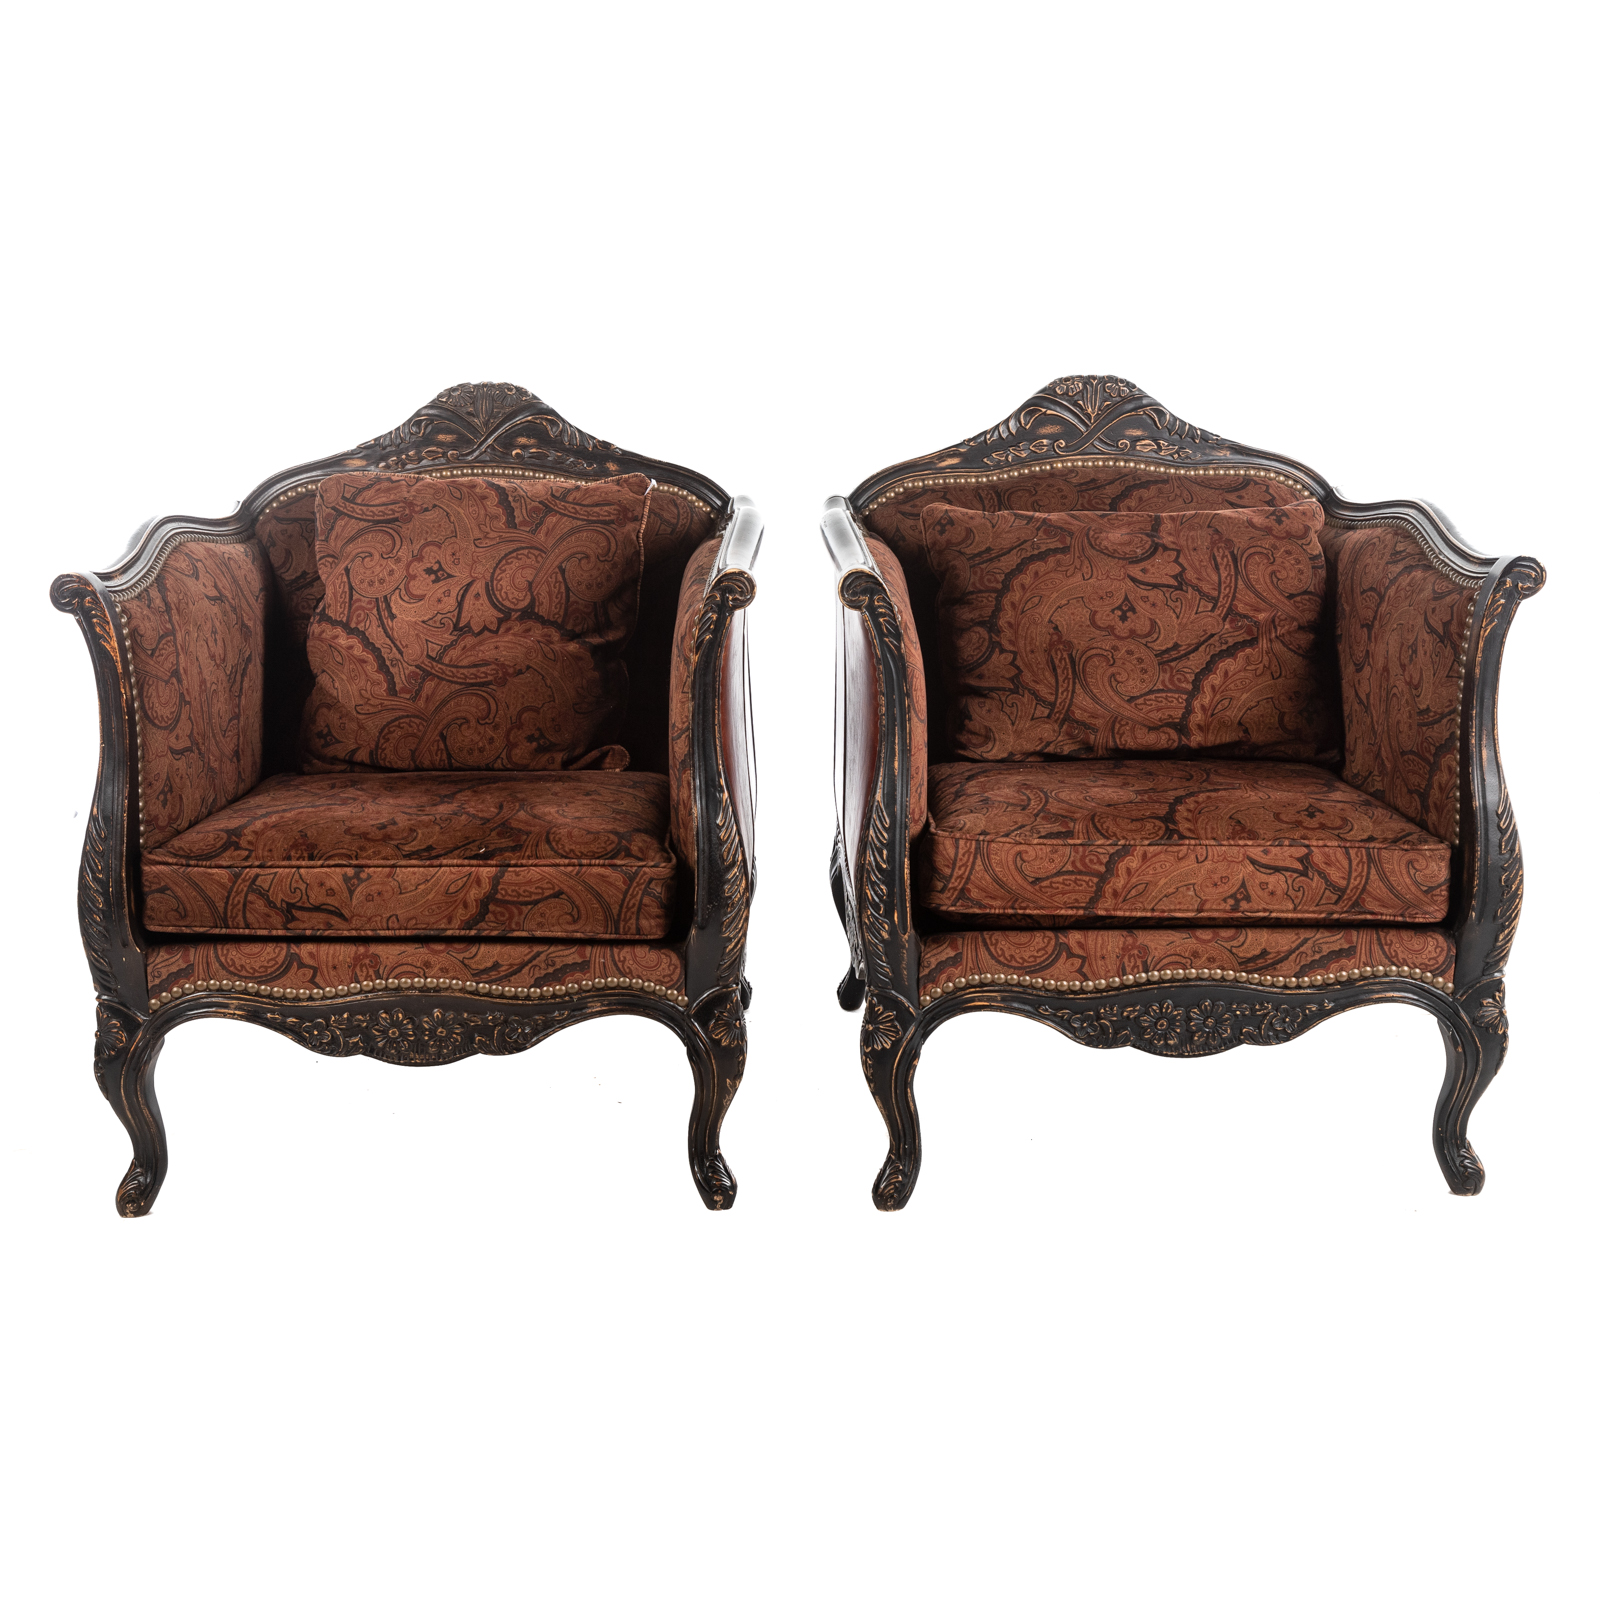 A PAIR OF PALADIN LOUIS XV STYLE 369a6f